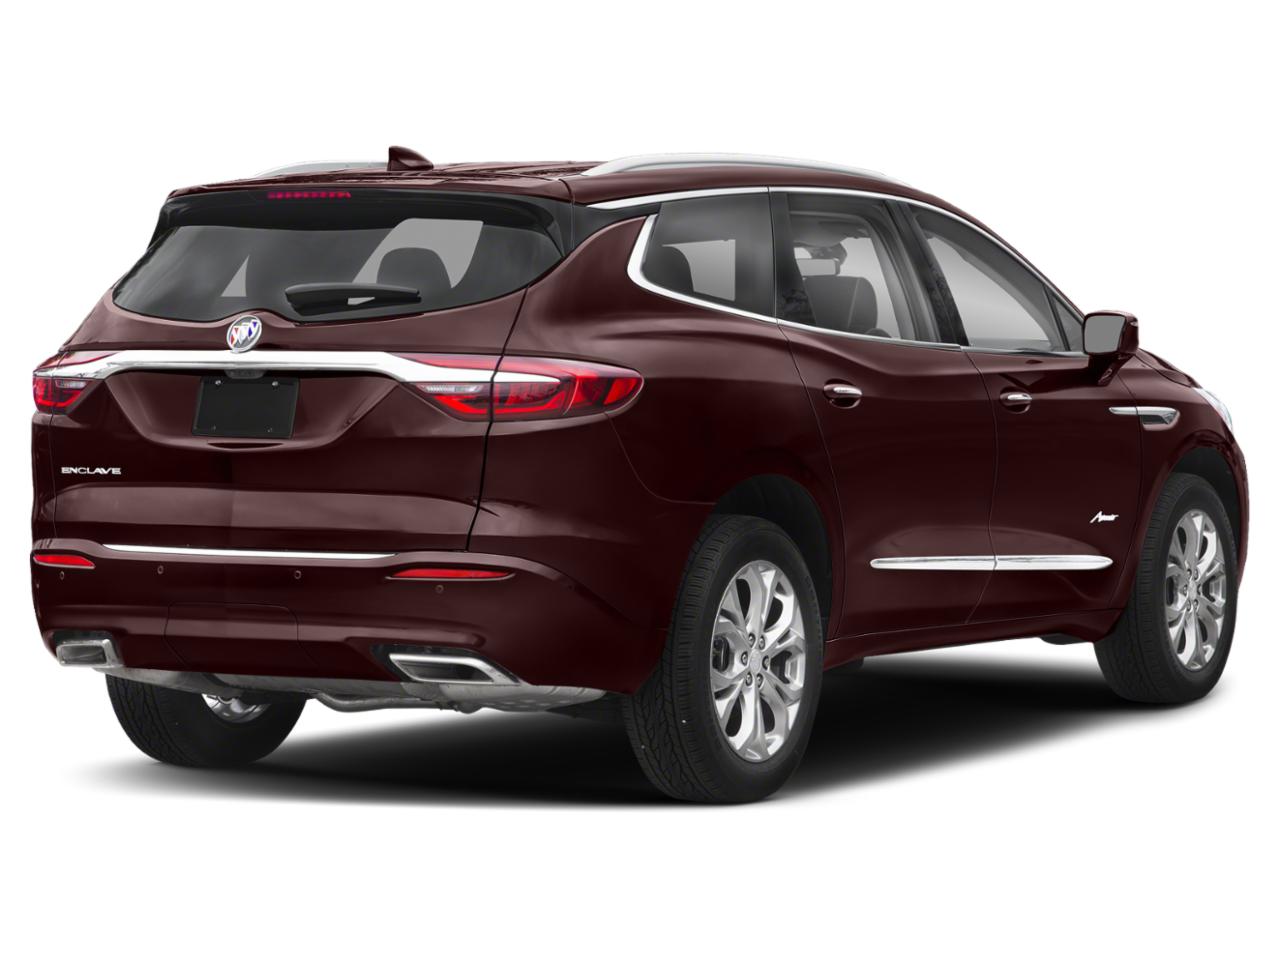 New 2021 Buick Enclave in Rich Garnet Metallic for Sale in Baltimore